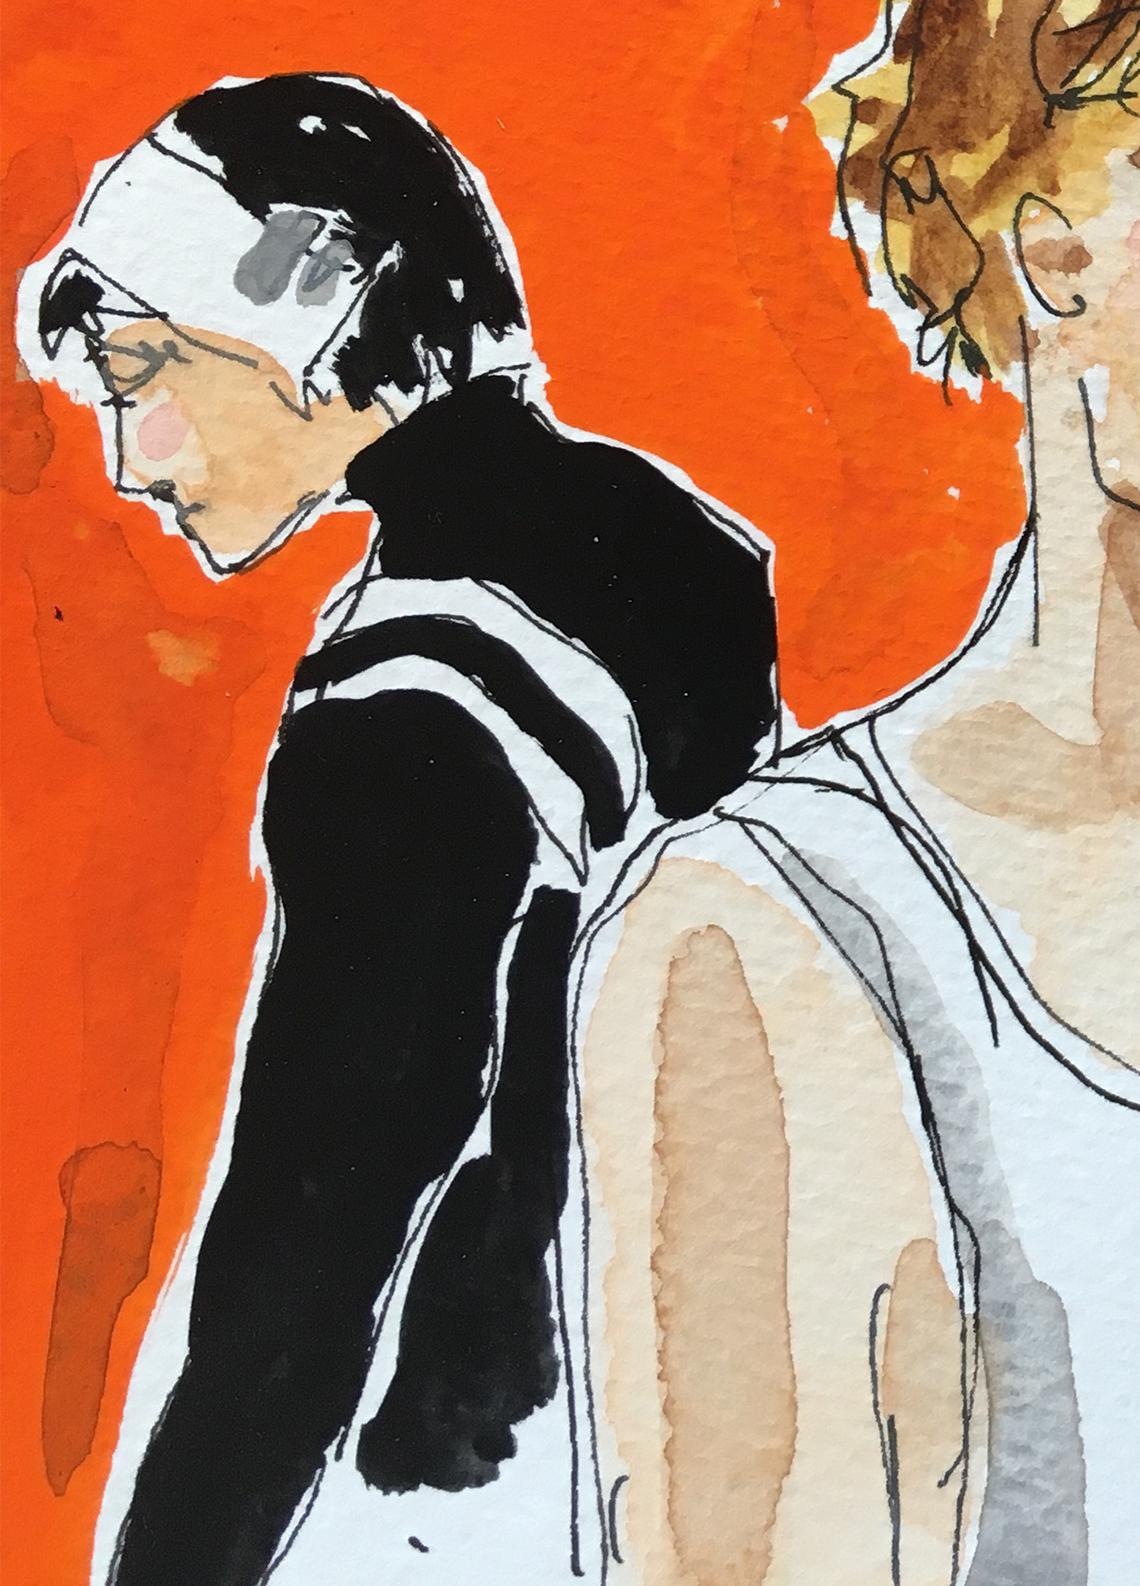 Orange Backstage, Fashion shows NYC 2021. Watercolor drawing  on paper - Painting by Manuel Santelices